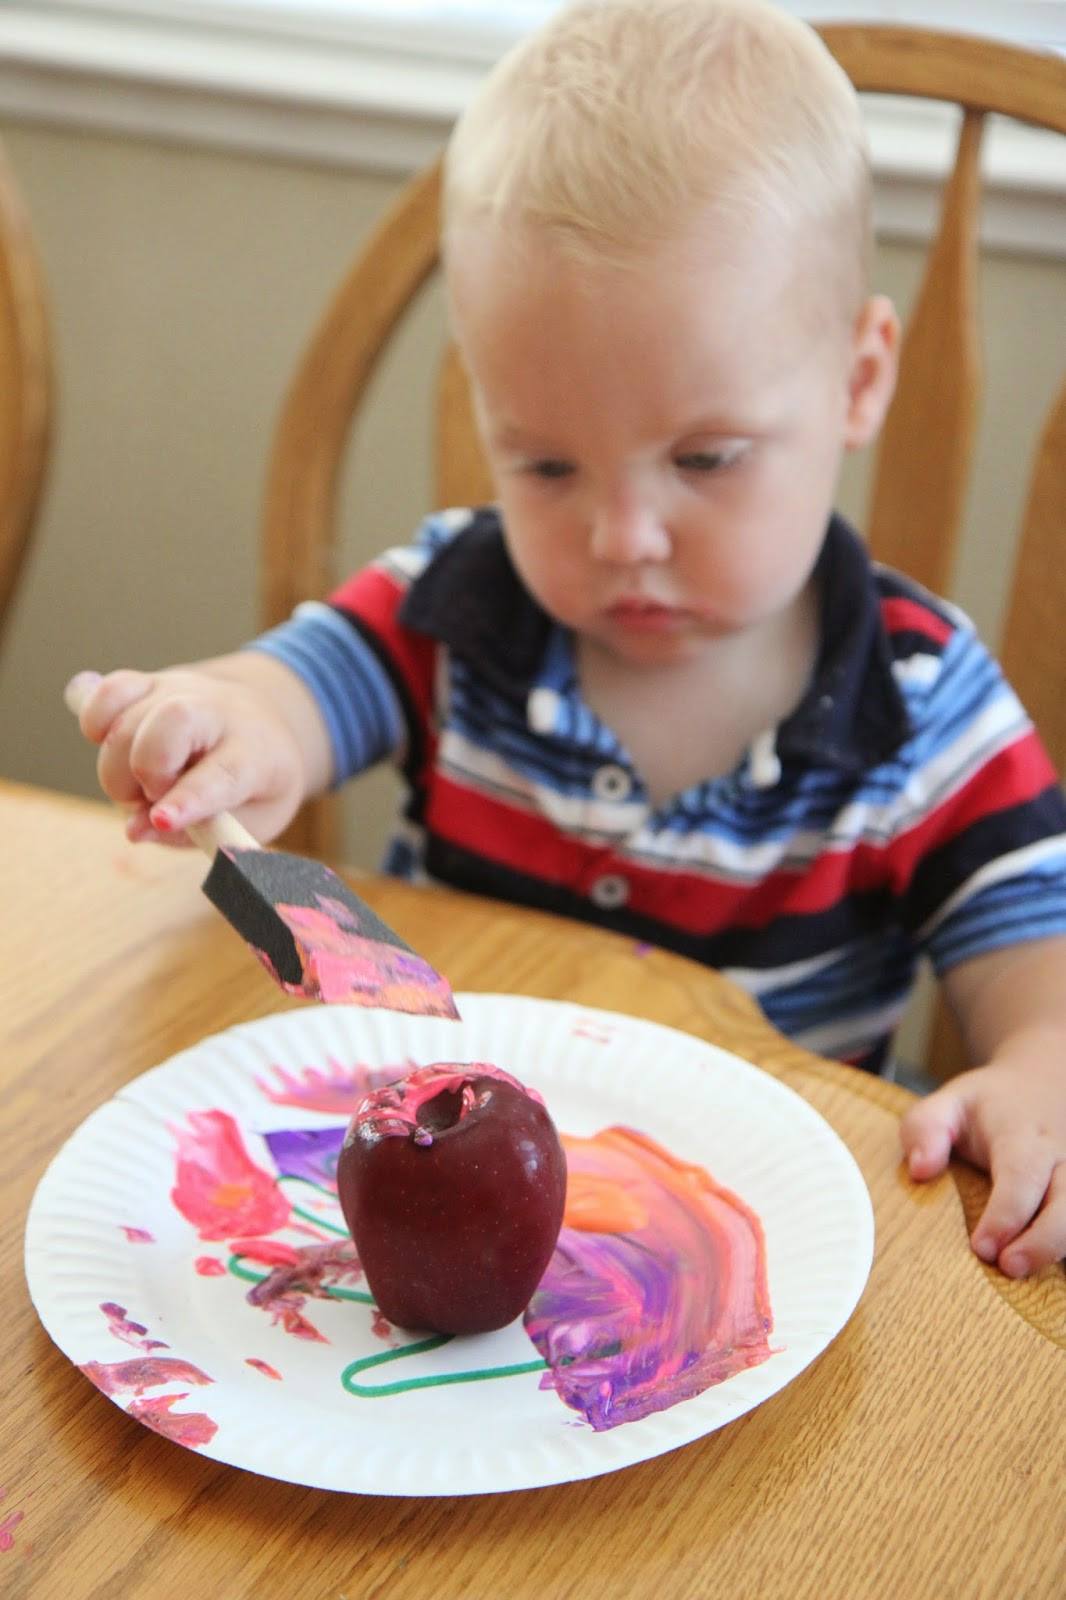 Crafts And Activities For Toddlers
 Toddler Approved 10 Apple Crafts and Activities for Kids